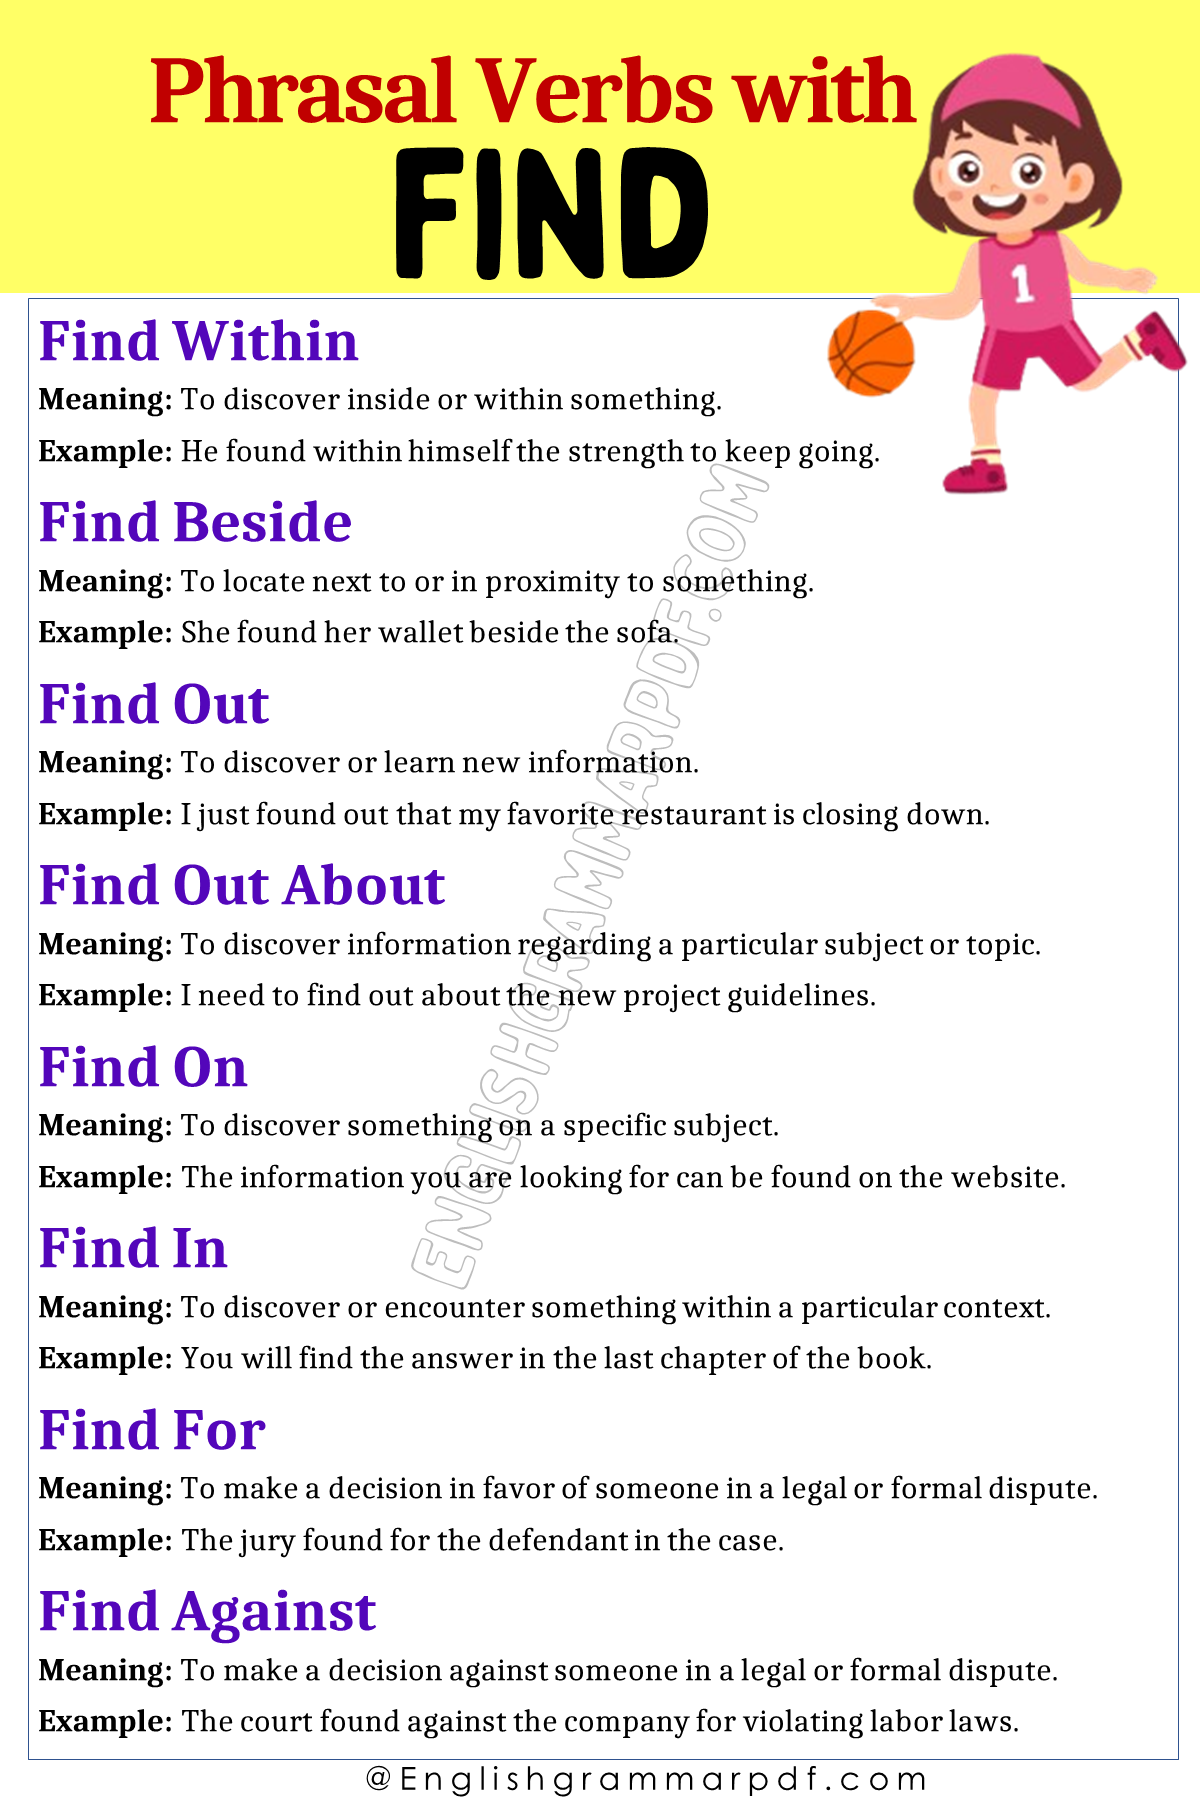 Phrasal Verbs with Find